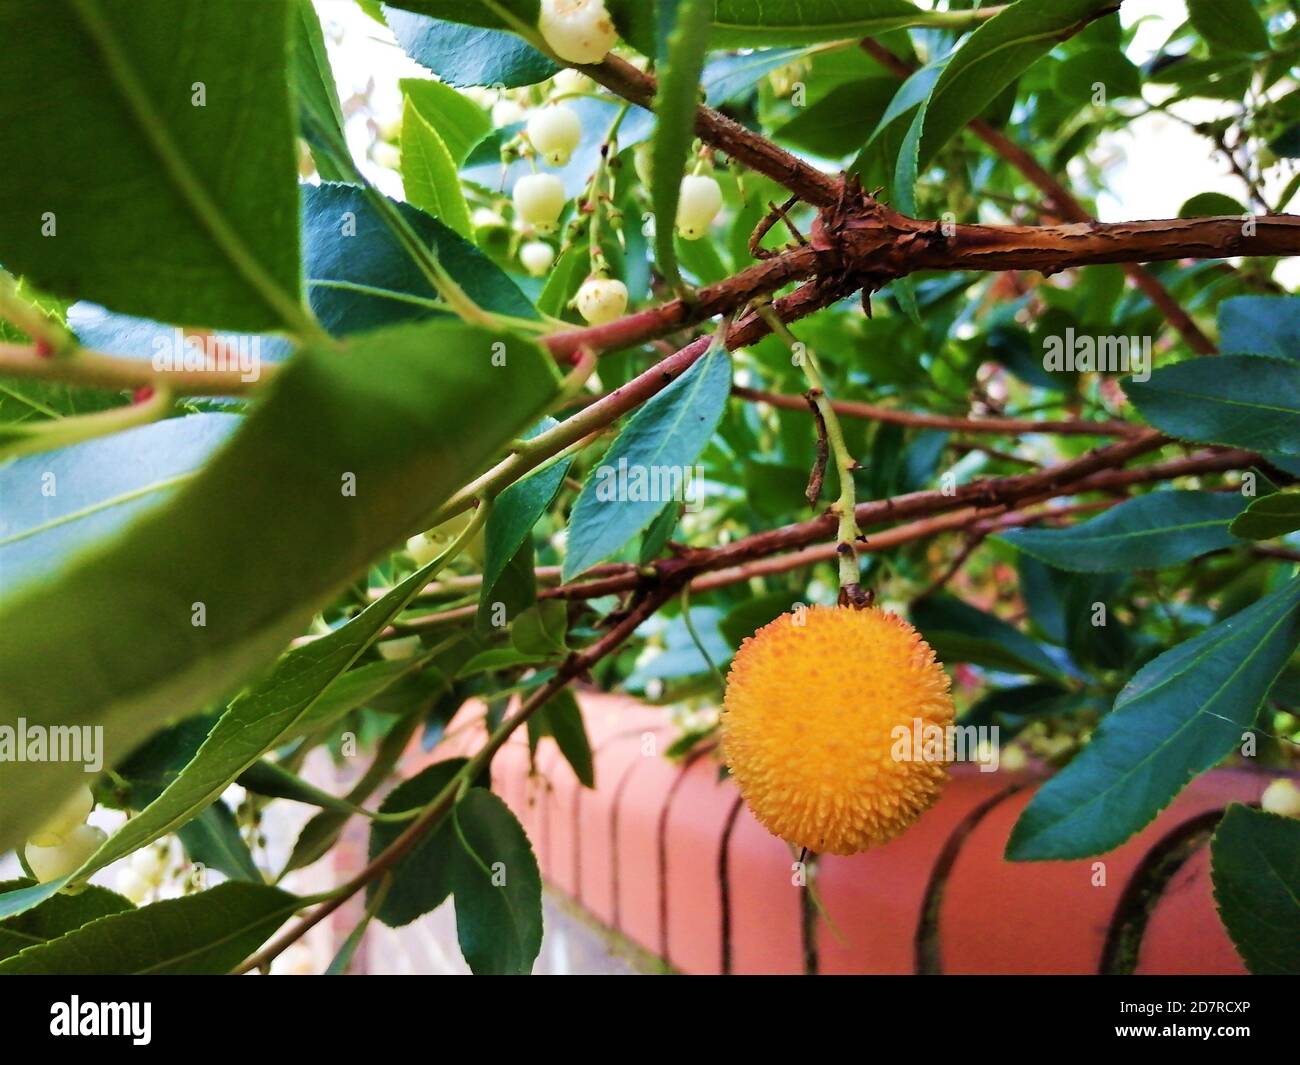 Yellow fruit of the Arbutus tree, close-up of strawberry tree fruits. Stock Photo